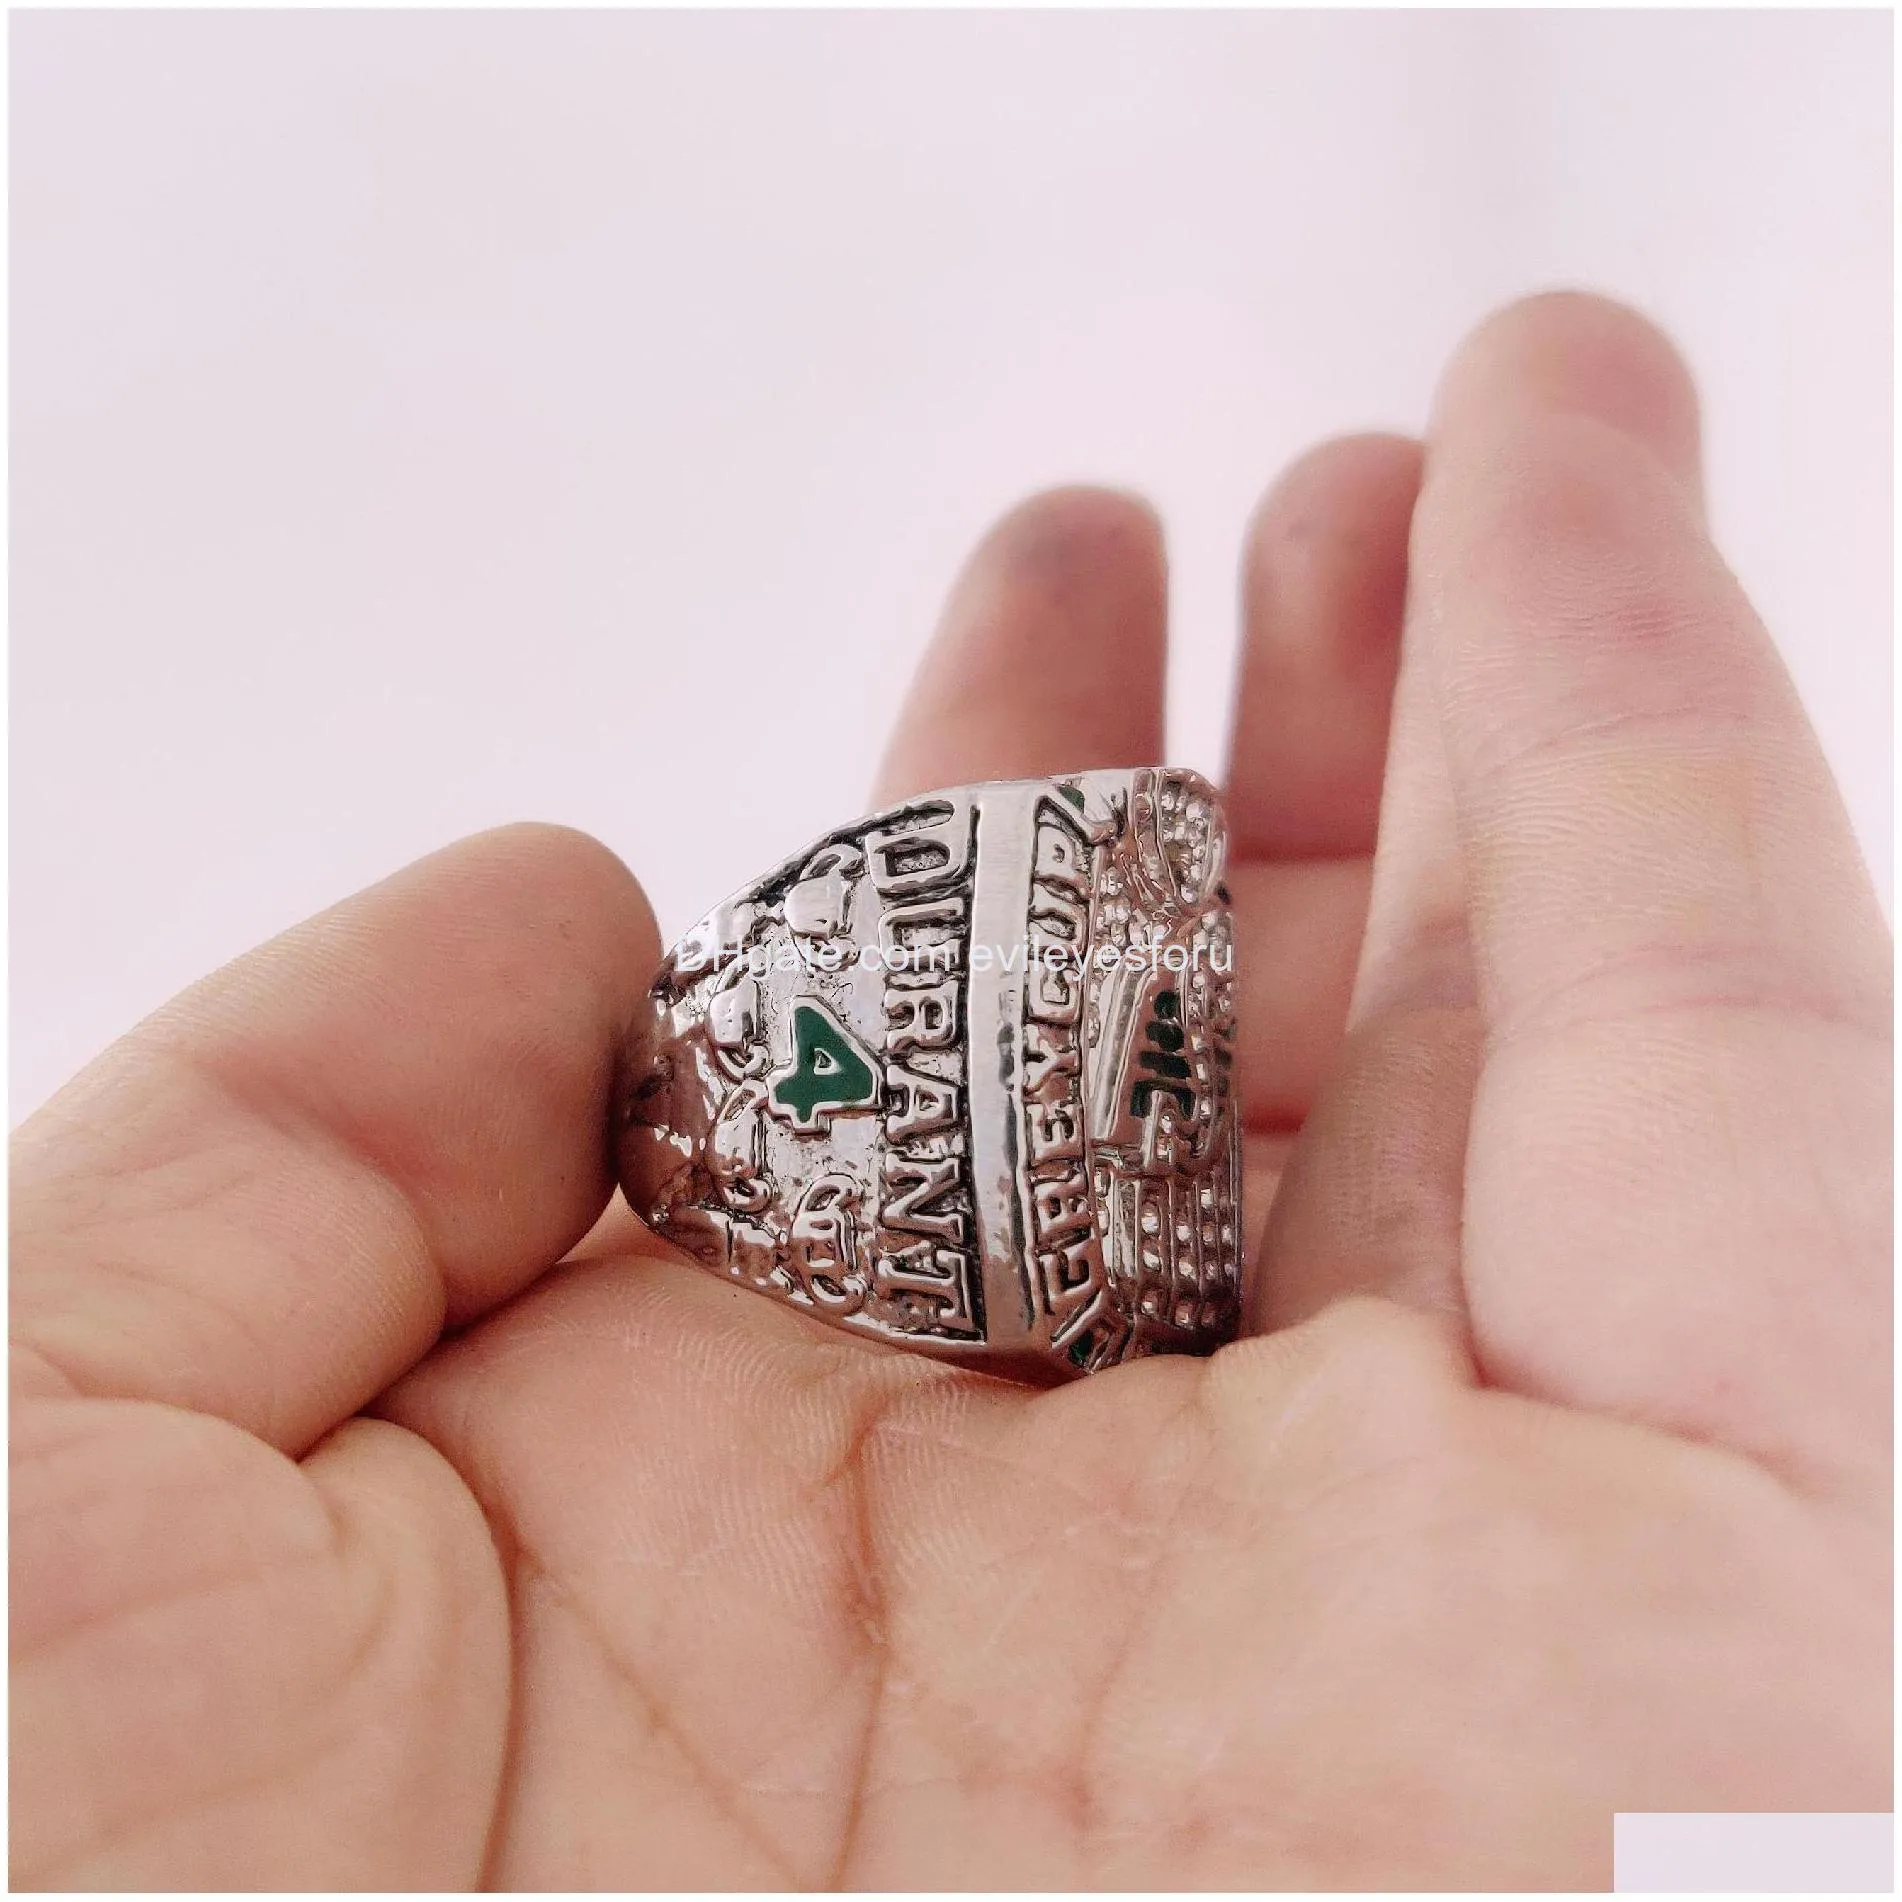 2021 wholesale 1989 saskatchewan roughriders championship ring fashion gifts from fans and friends leather bag parts accessories